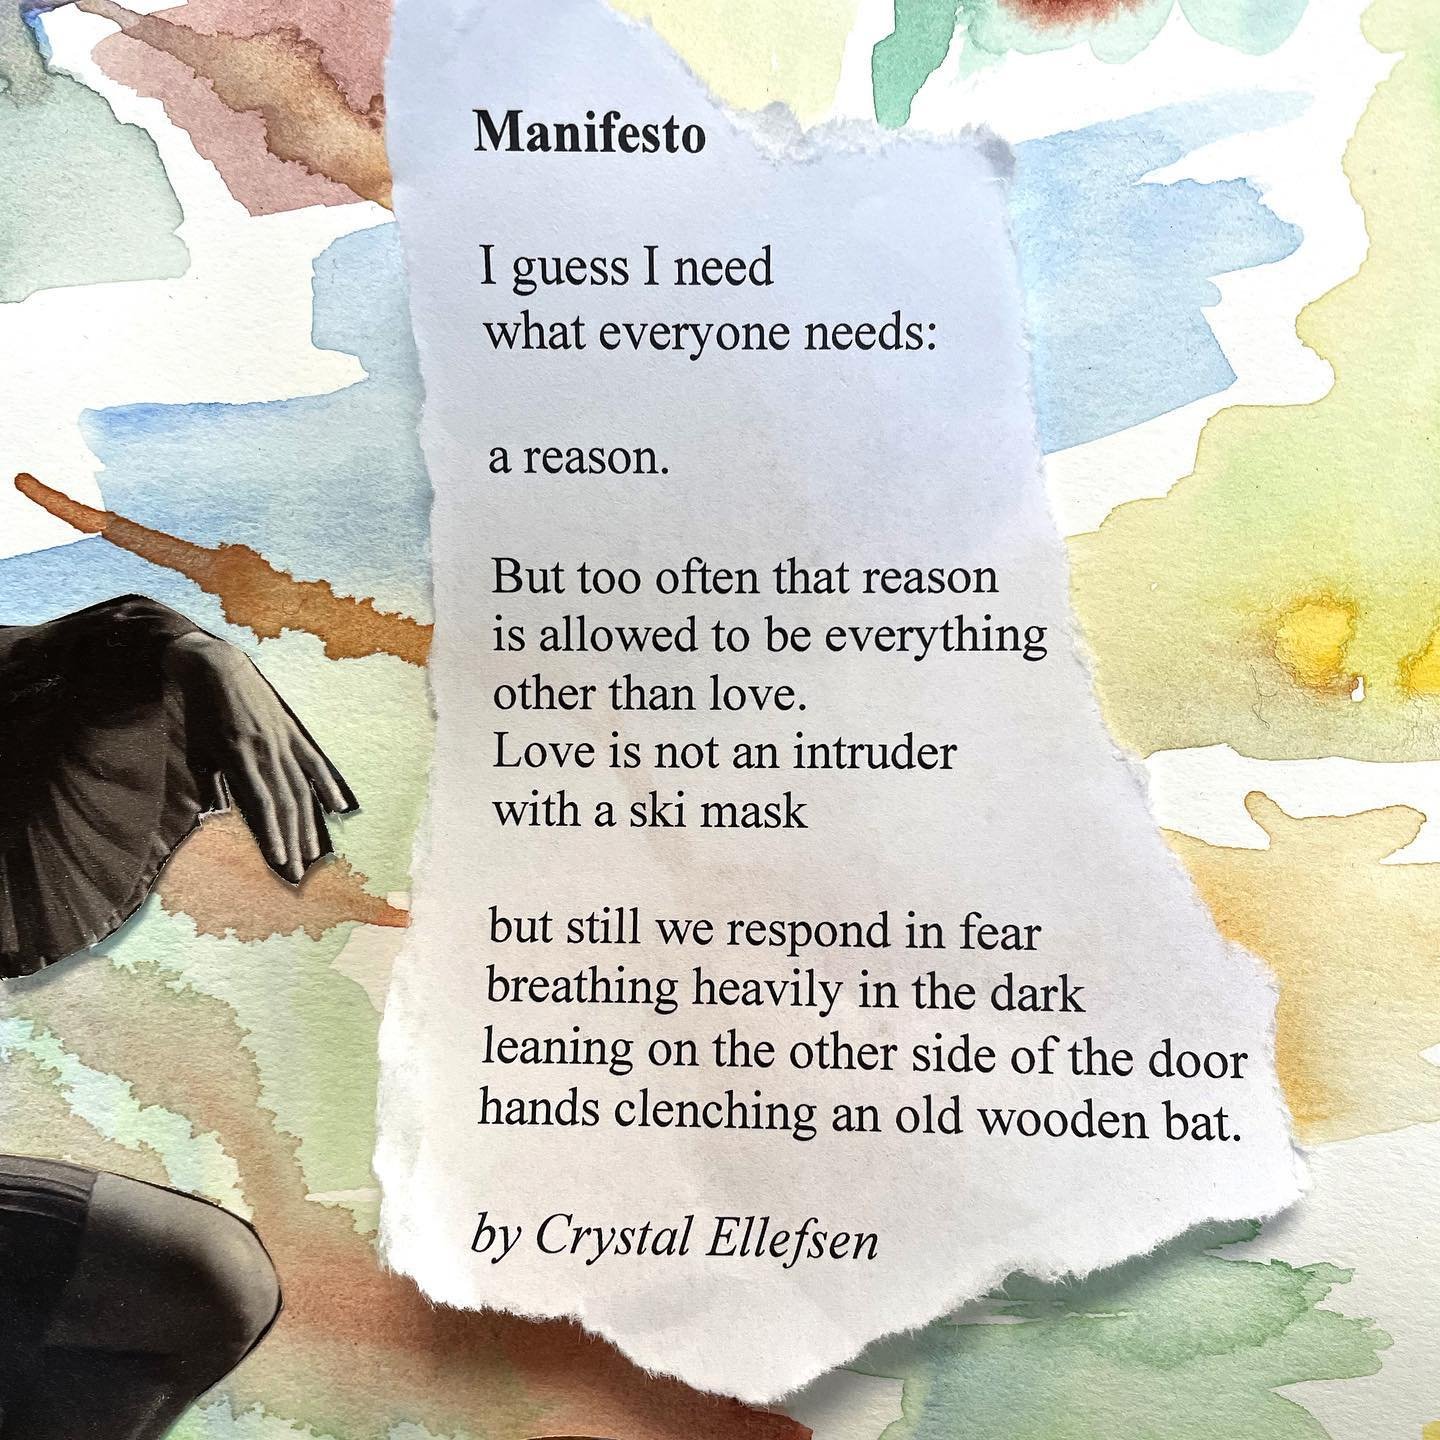 I guess I need what everyone needs.

#poems #poetry #manifesto #love